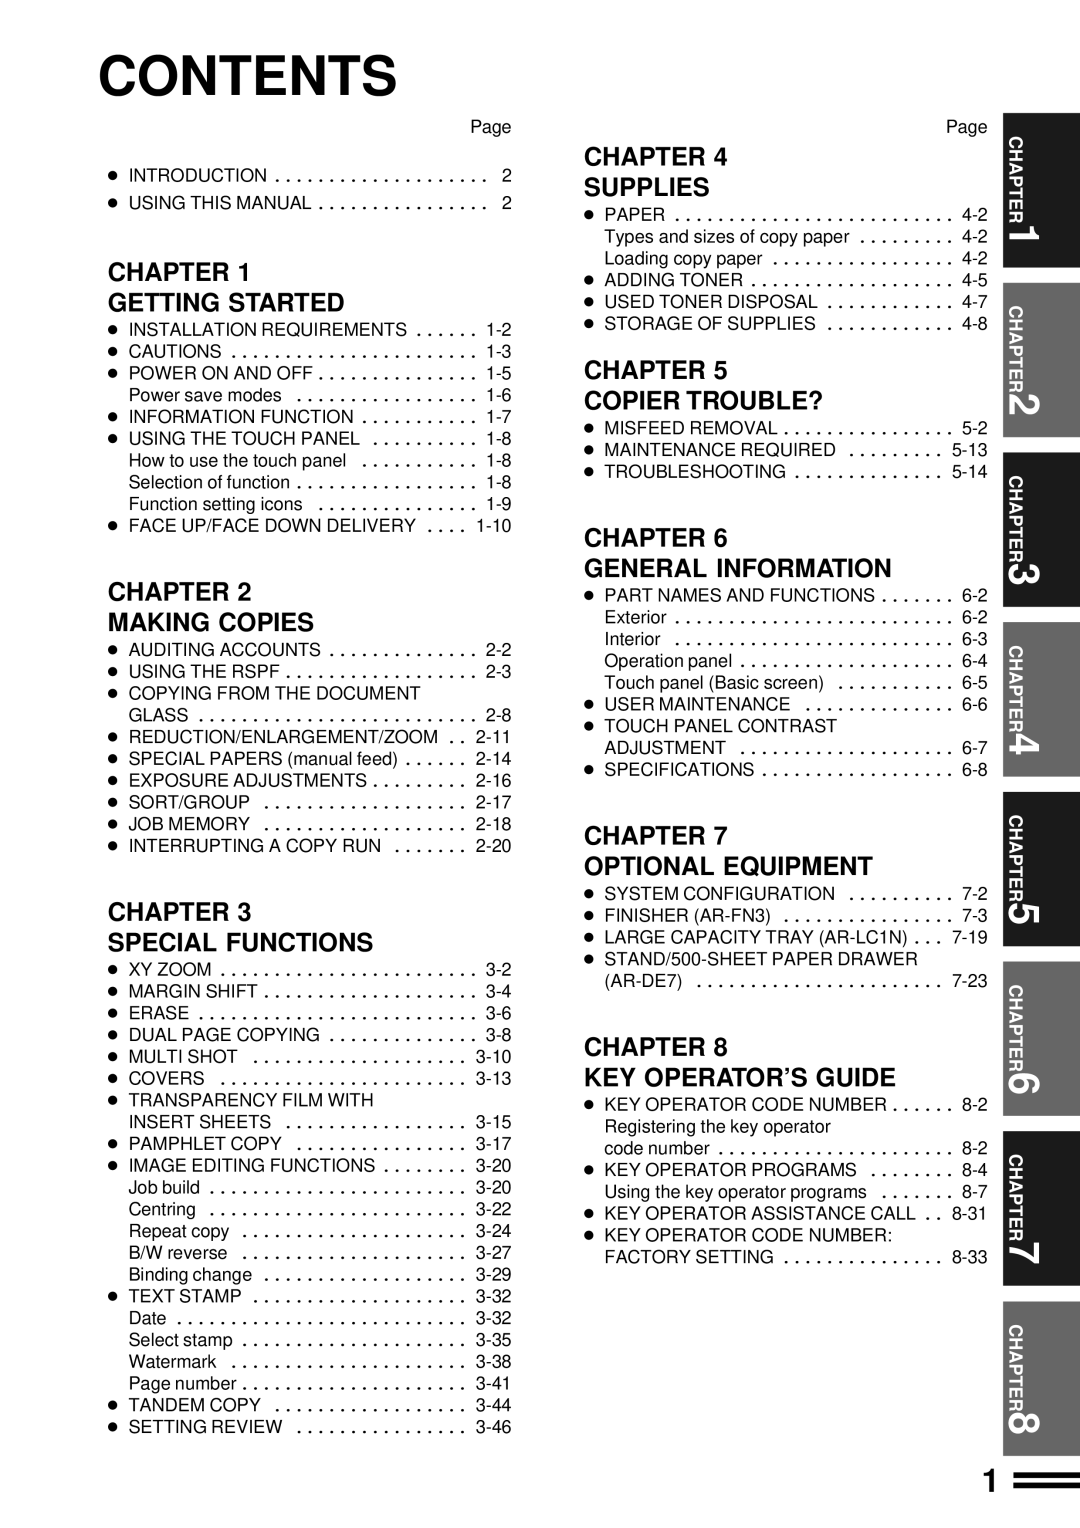 Sharp AR-507 operation manual Contents, Chapter Getting Started, Chapter Making Copies, Chapter Special Functions, Supplies 